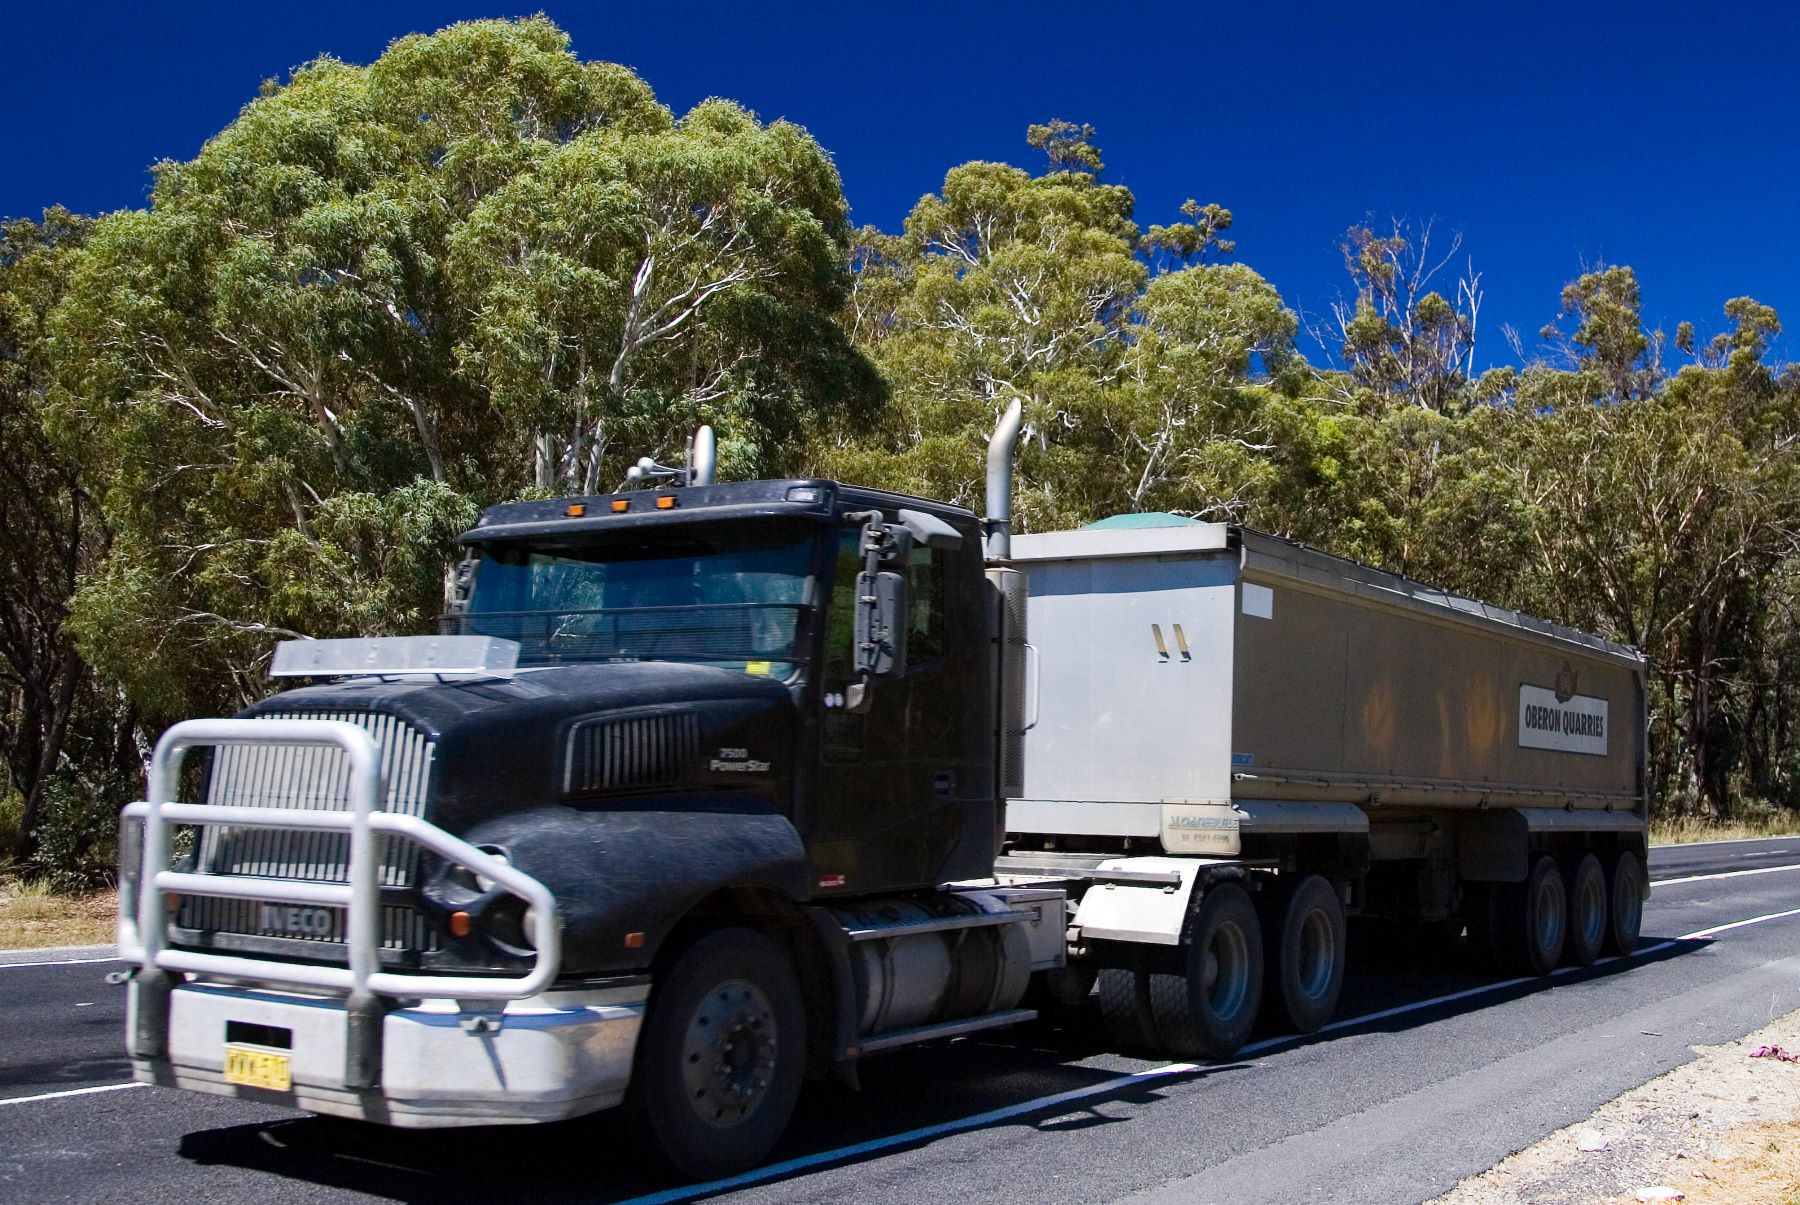 Long-haul trucking along the Great Western Highway from Sydney to Adelaide, Australia